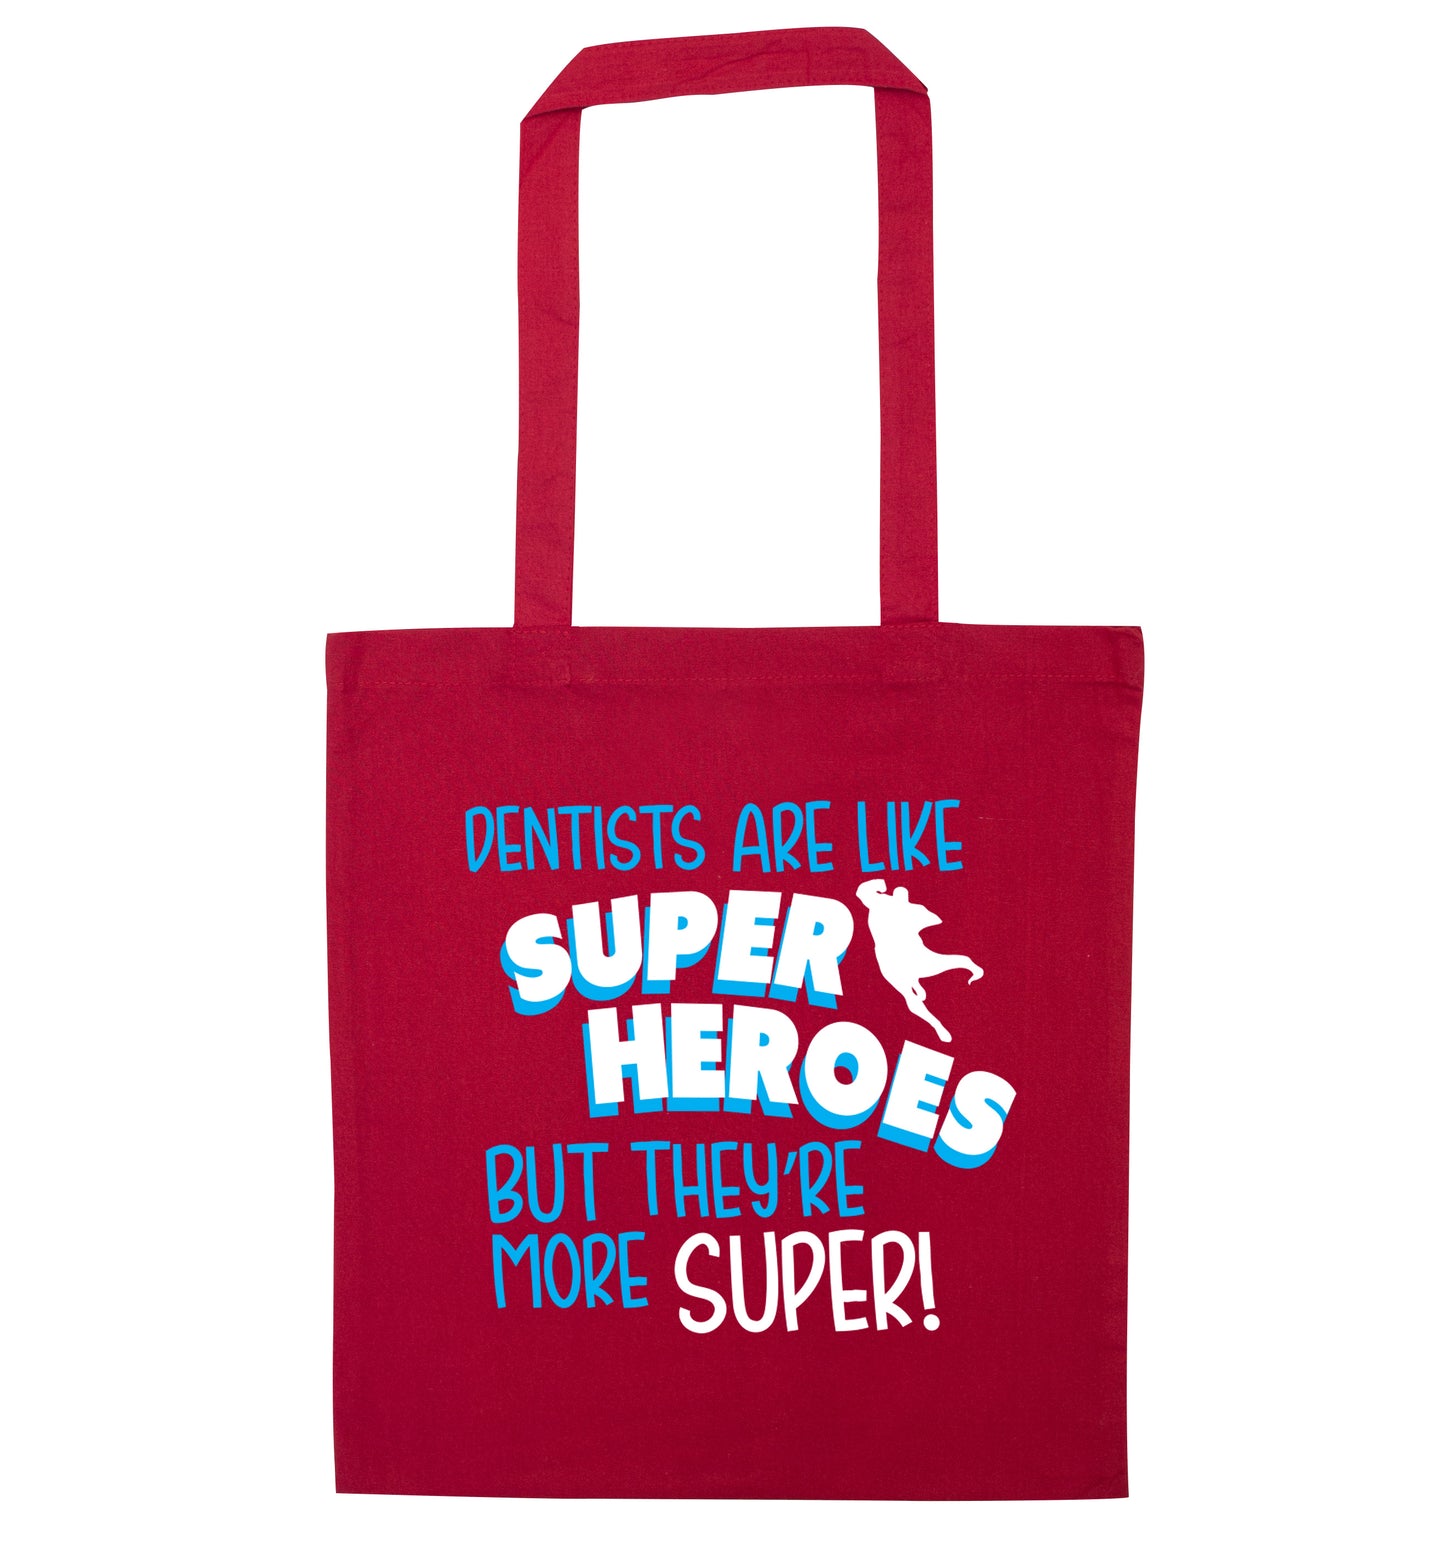 Dentists are like superheros but they're more super red tote bag